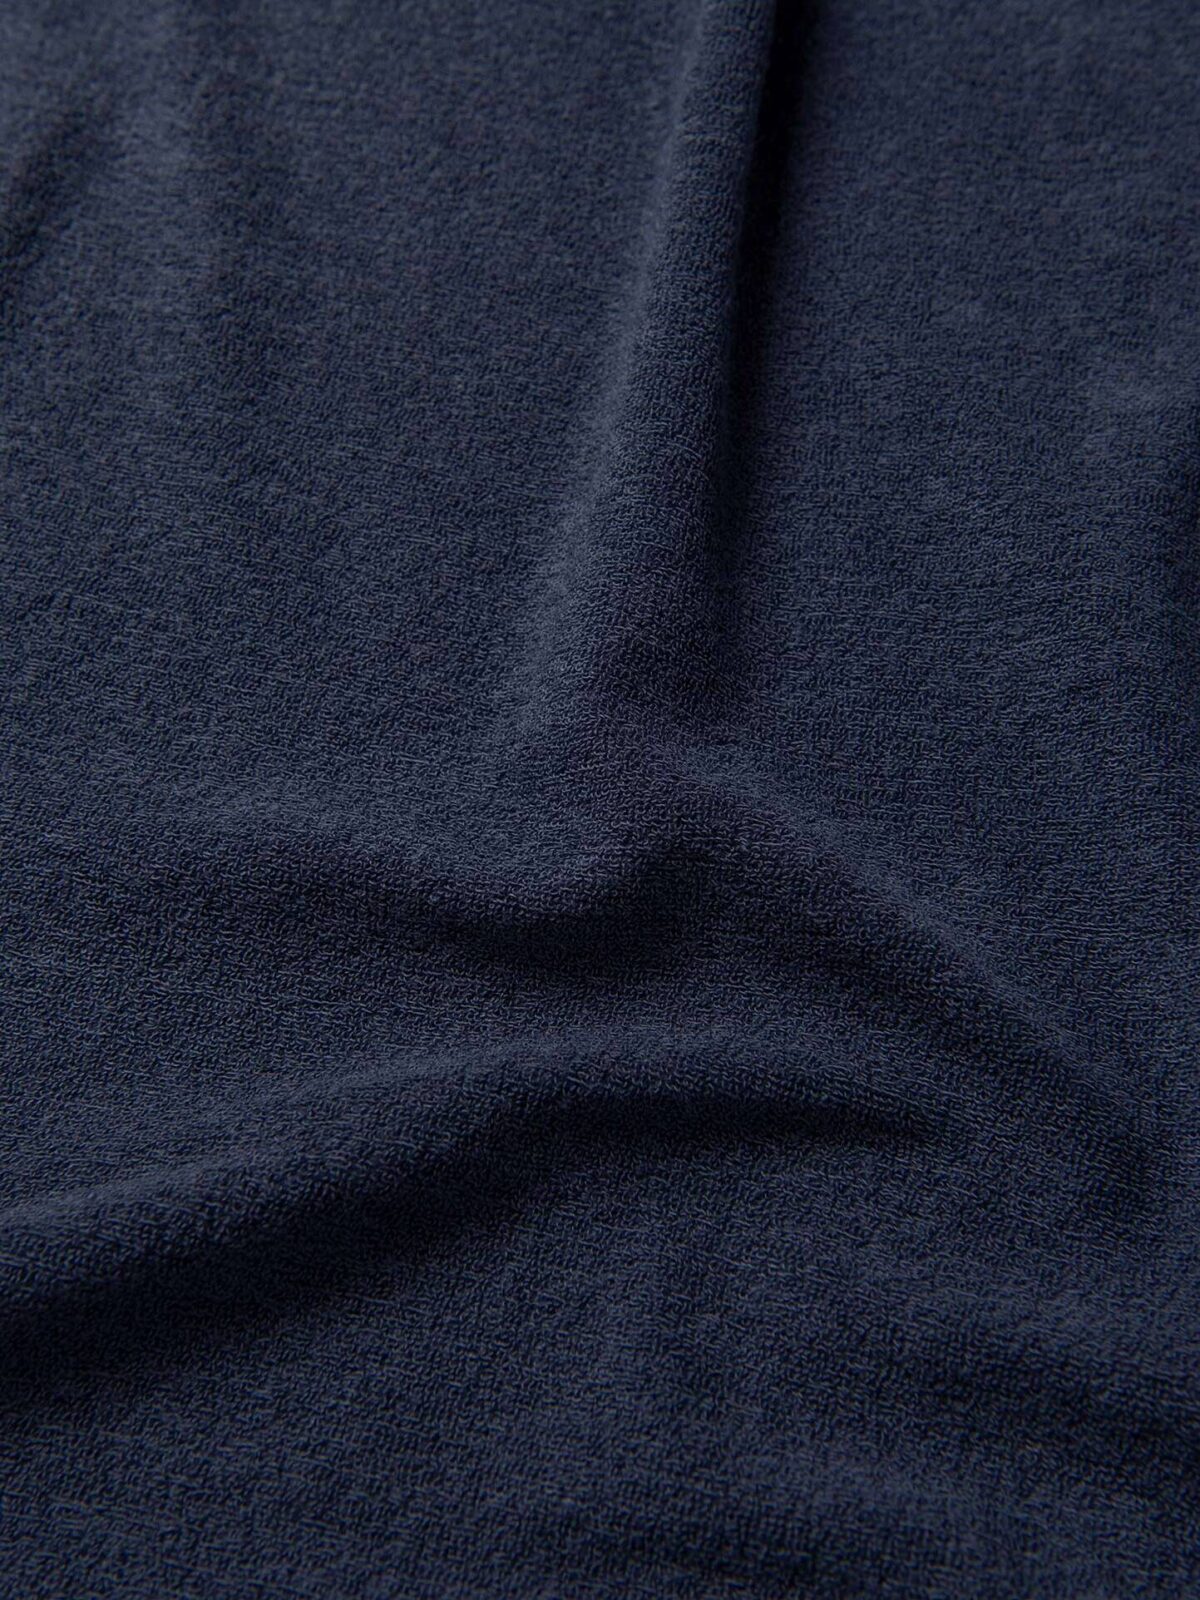 Japanese Faded Navy Terry Cloth Knit Shirts by Proper Cloth